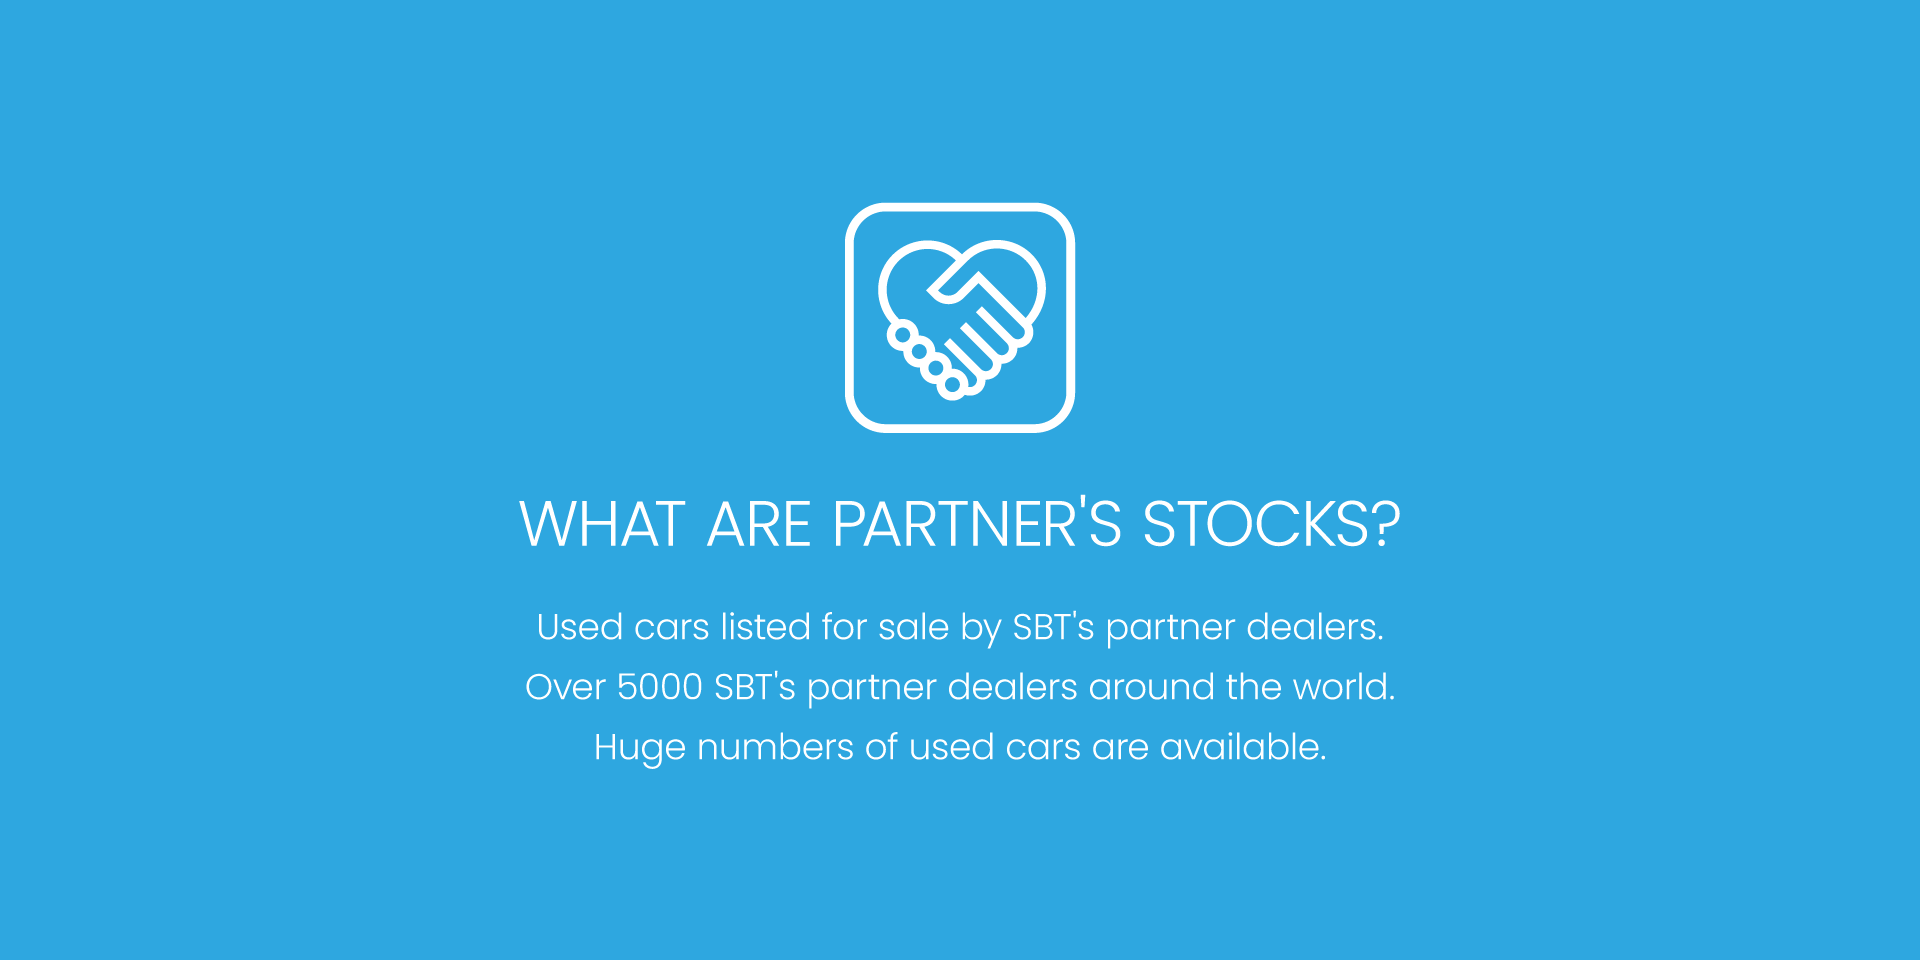 WHAT ARE PARTNER'S STOCKS? - Used cars listed for sale by SBT's partner dealers. Over 5,000 SBT's partner dealers around the world. Huge numbers of used cars are available.